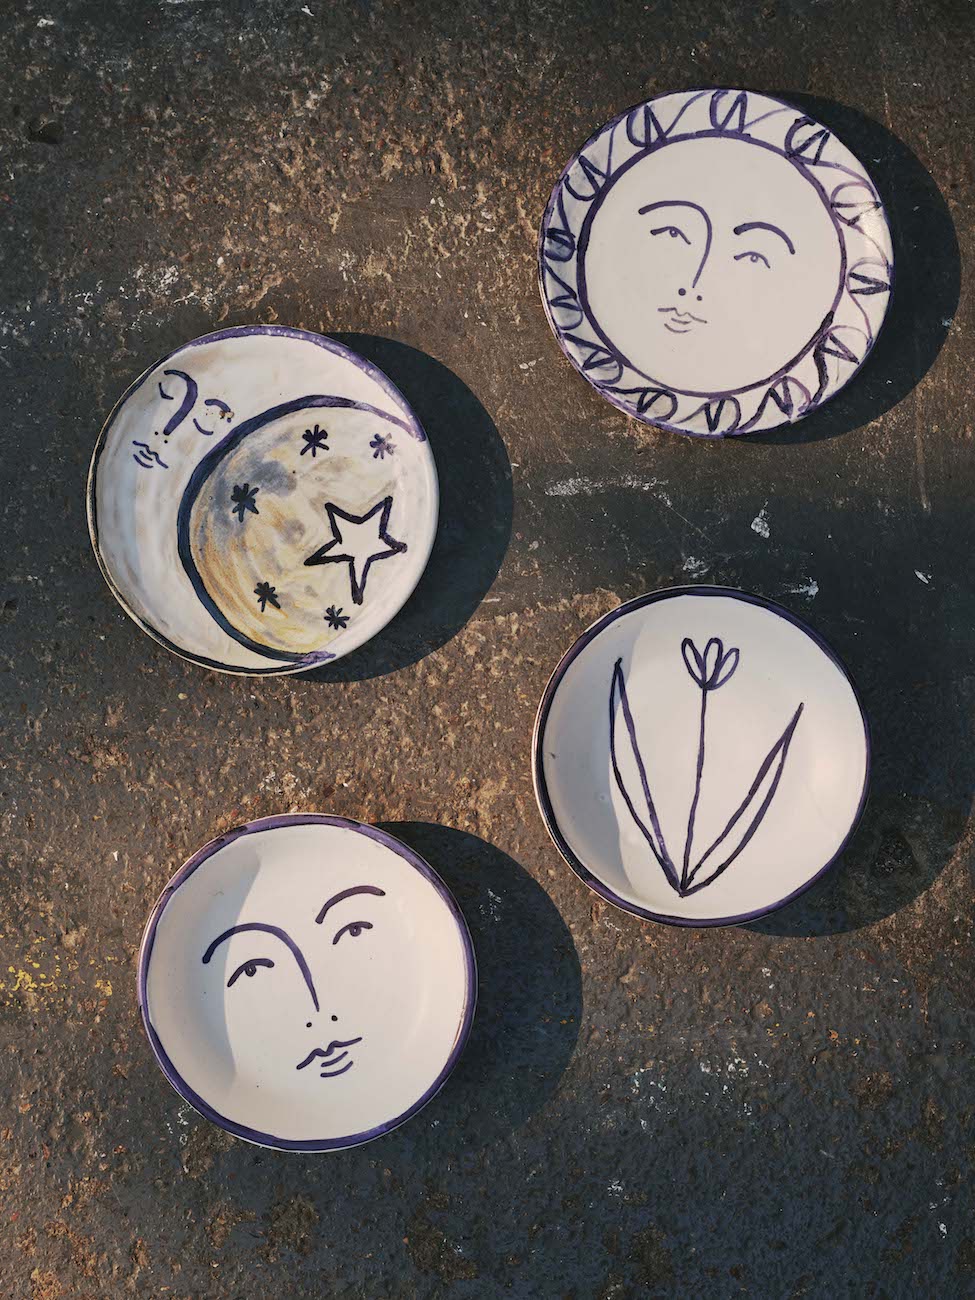 Homeware collection of handpainted ceramic plates by emerging artist Frances Costelloe.